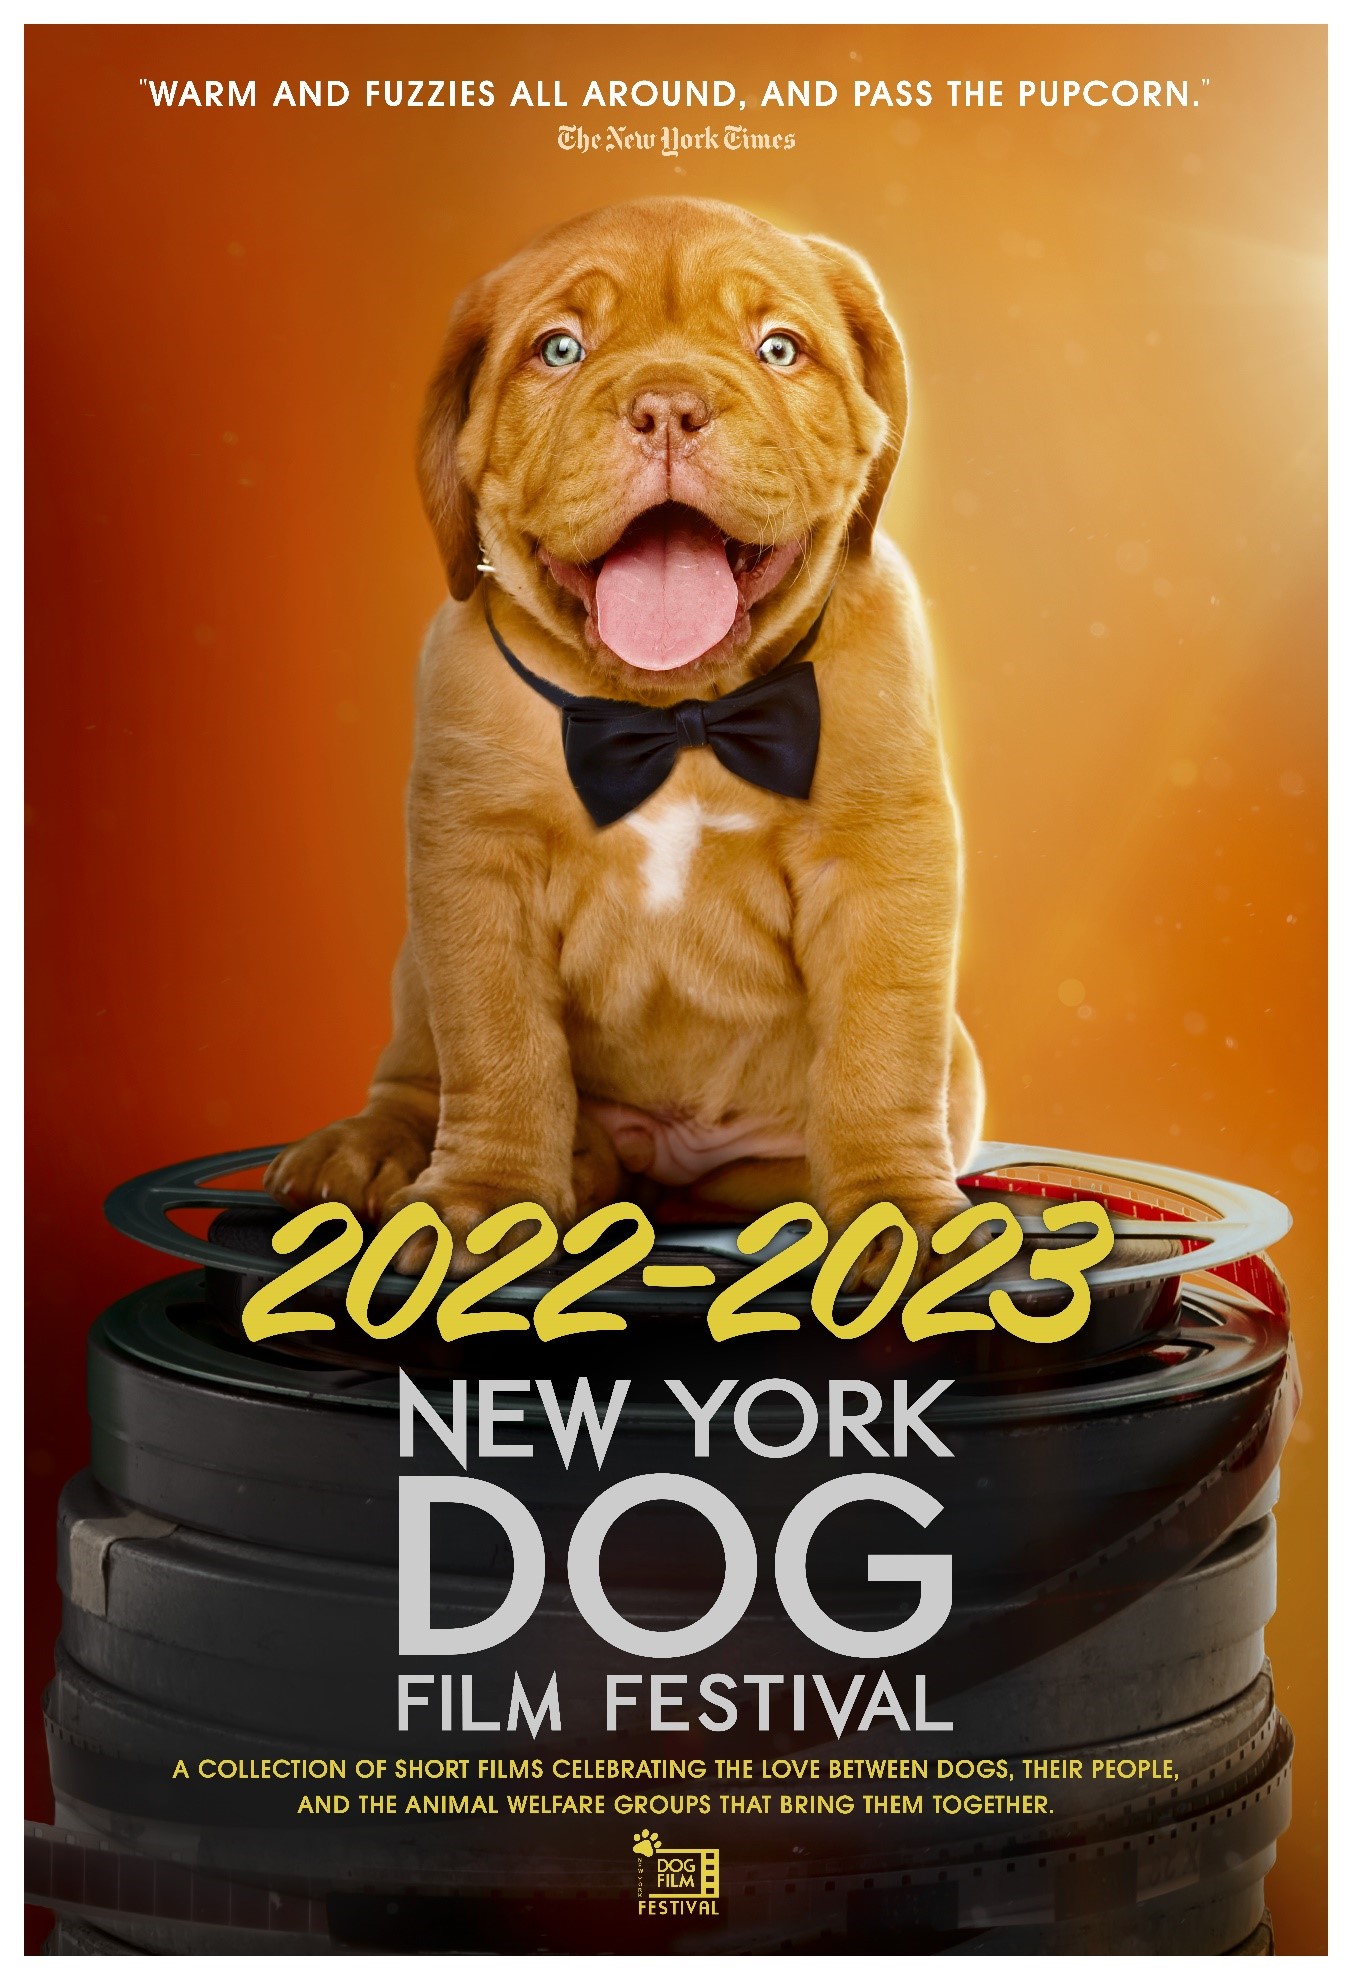 Film poster for 7th ANNUAL NY DOG FILM FESTIVAL